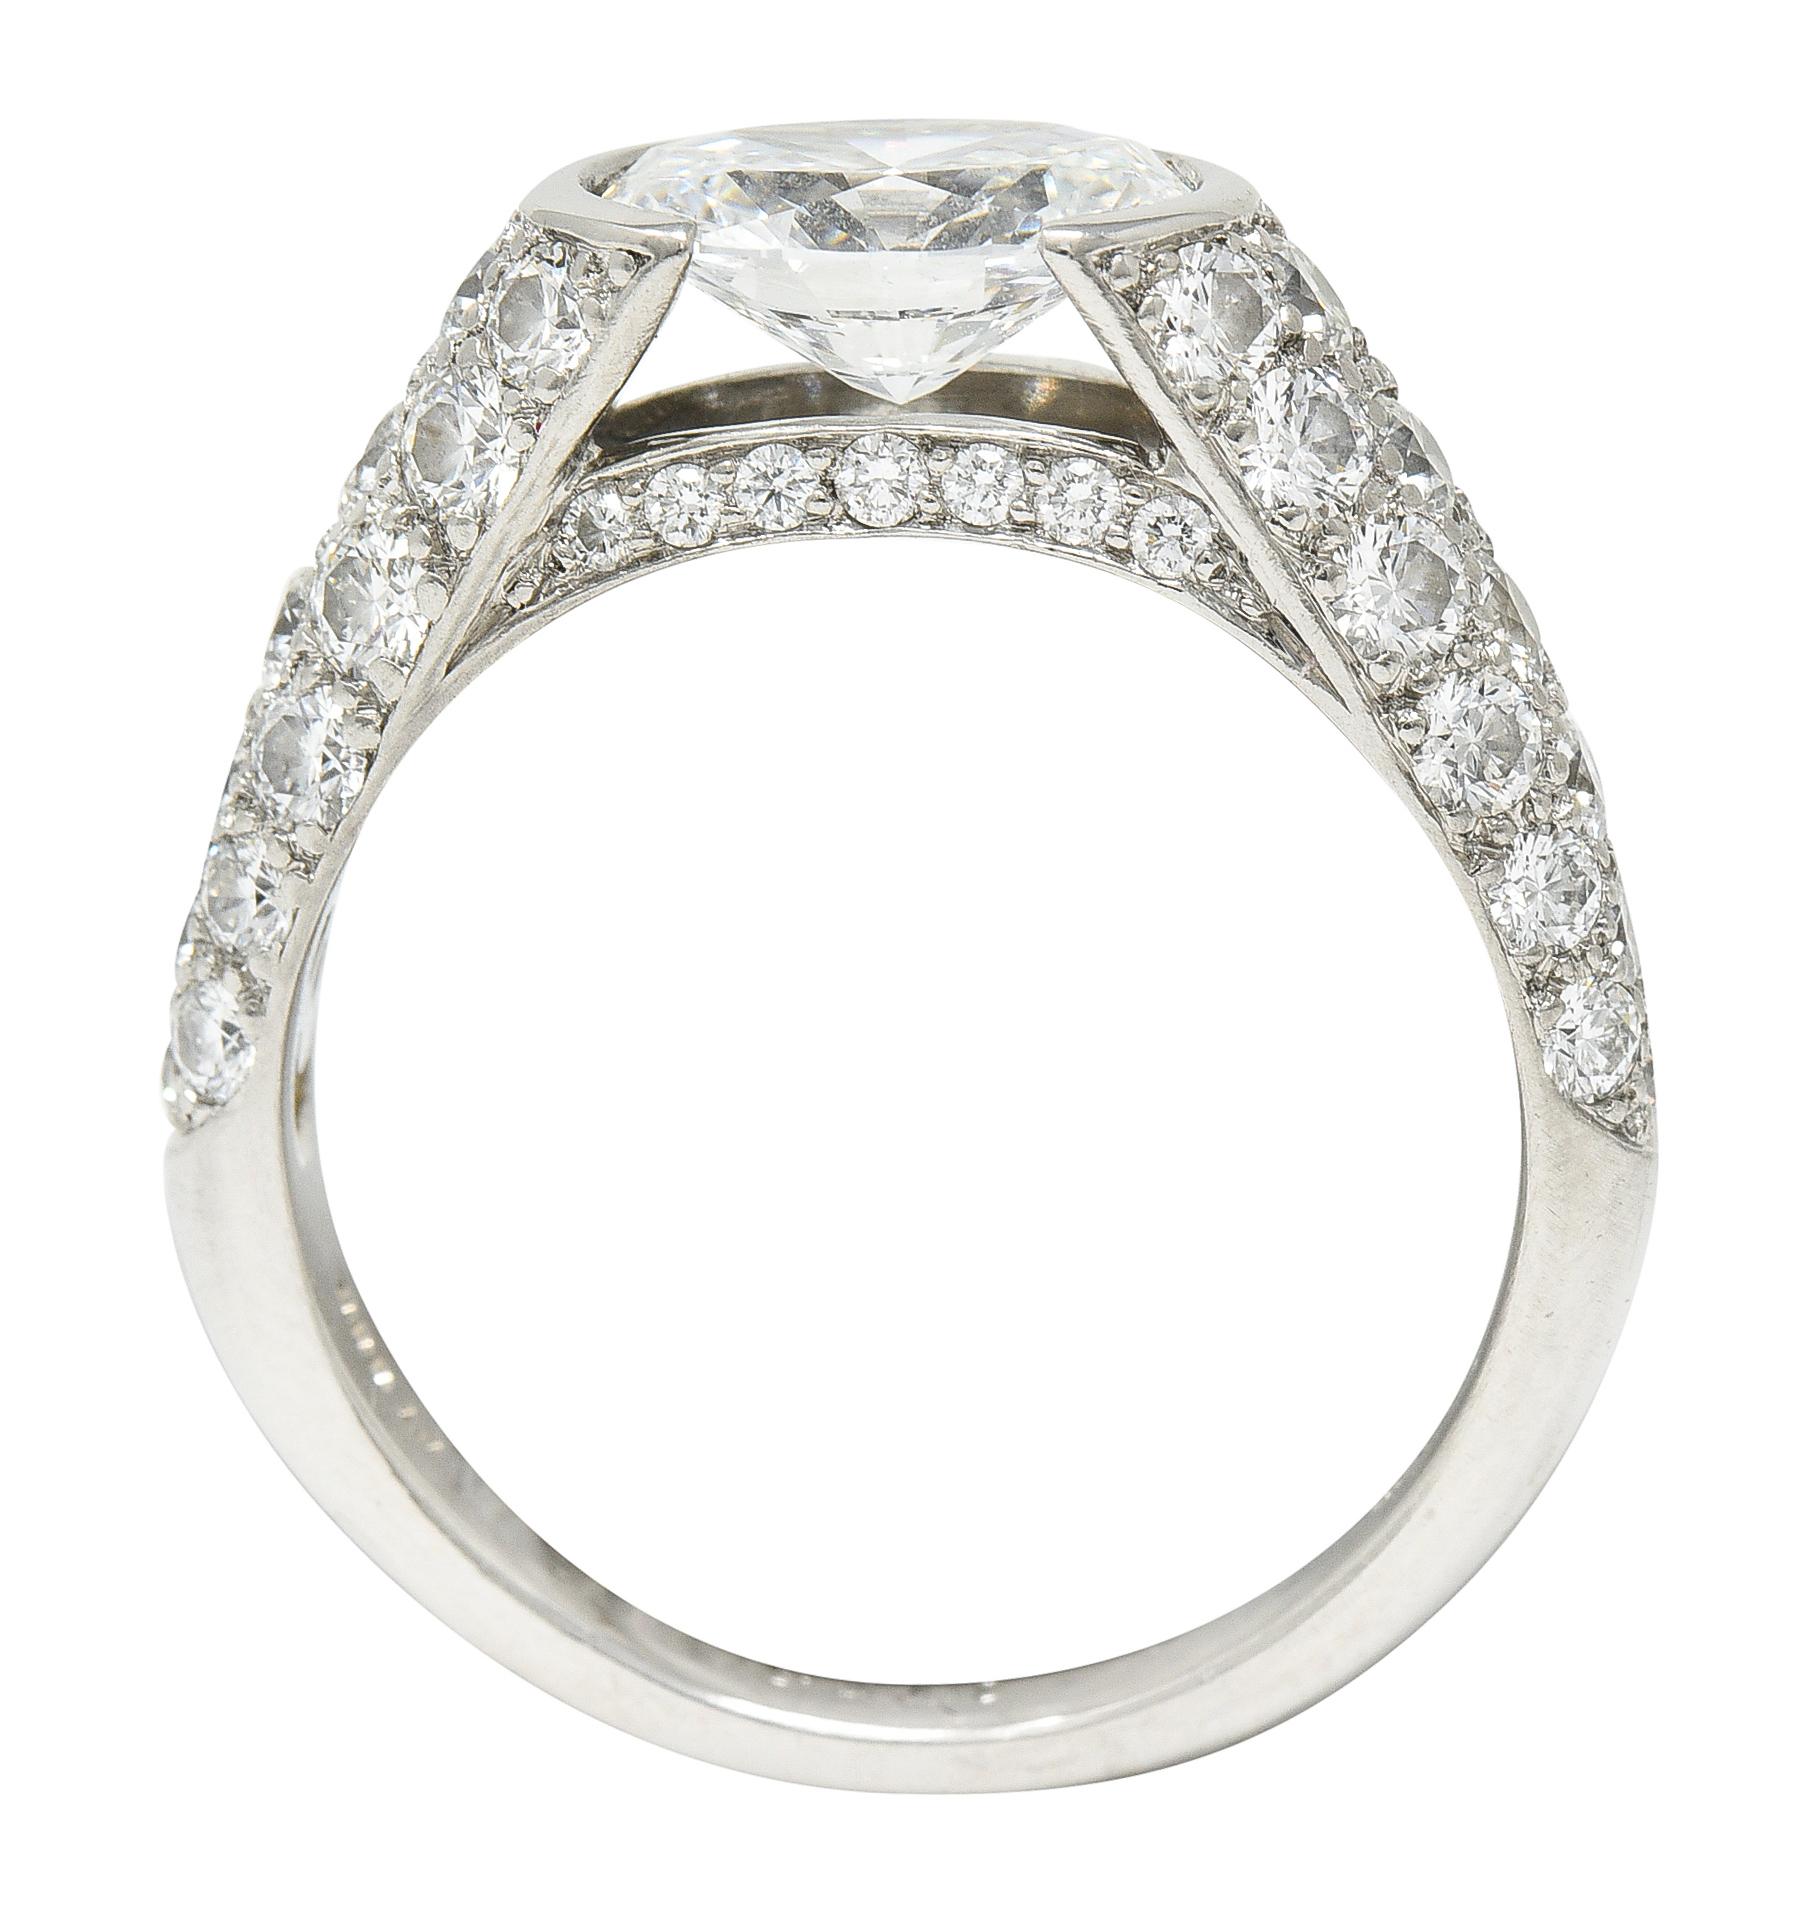 Featuring an oval cut diamond weighing 1.44 carat - E color with VVS2 clarity. Half bezel set East to West with dramatic cathedral shoulders. Pavè set with round brilliant cut diamonds. Weighing collectively approximately 2.00 carats - F/G color